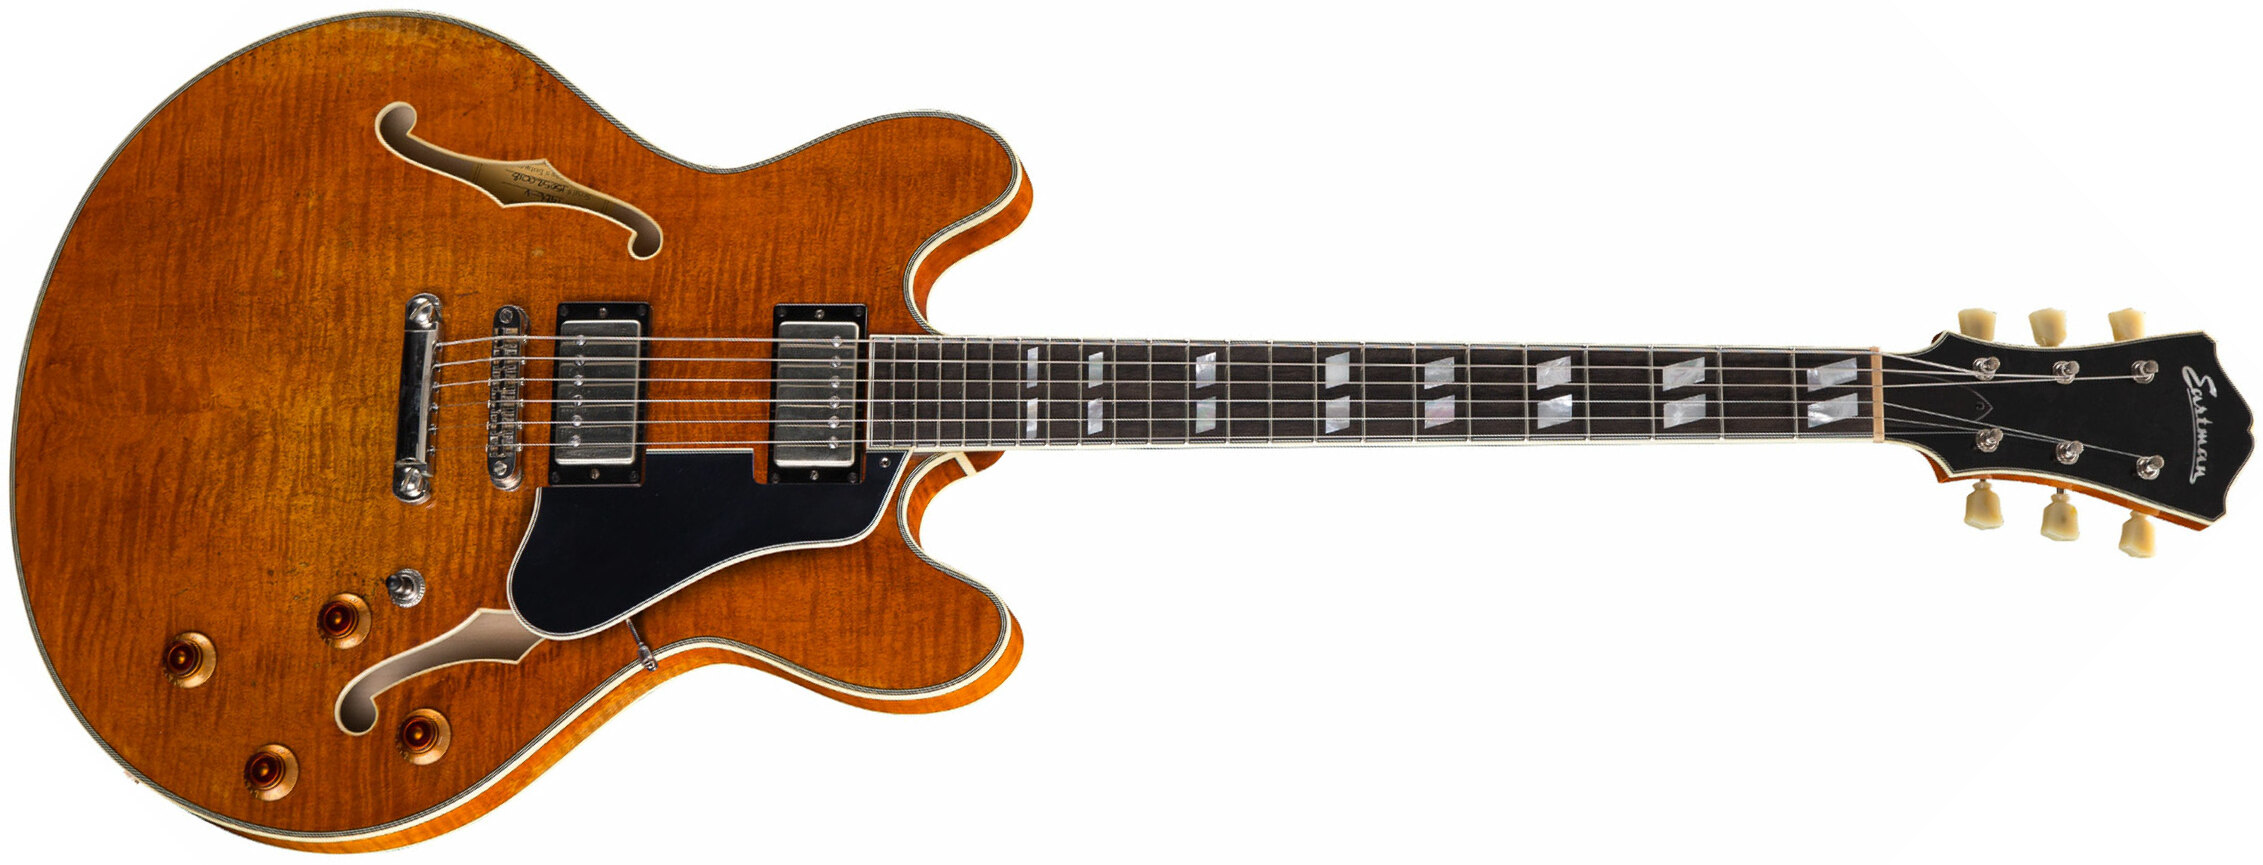 Eastman T59v Thinline Laminate Hh Lollar Ht Eb - Amber - Semi-hollow electric guitar - Main picture